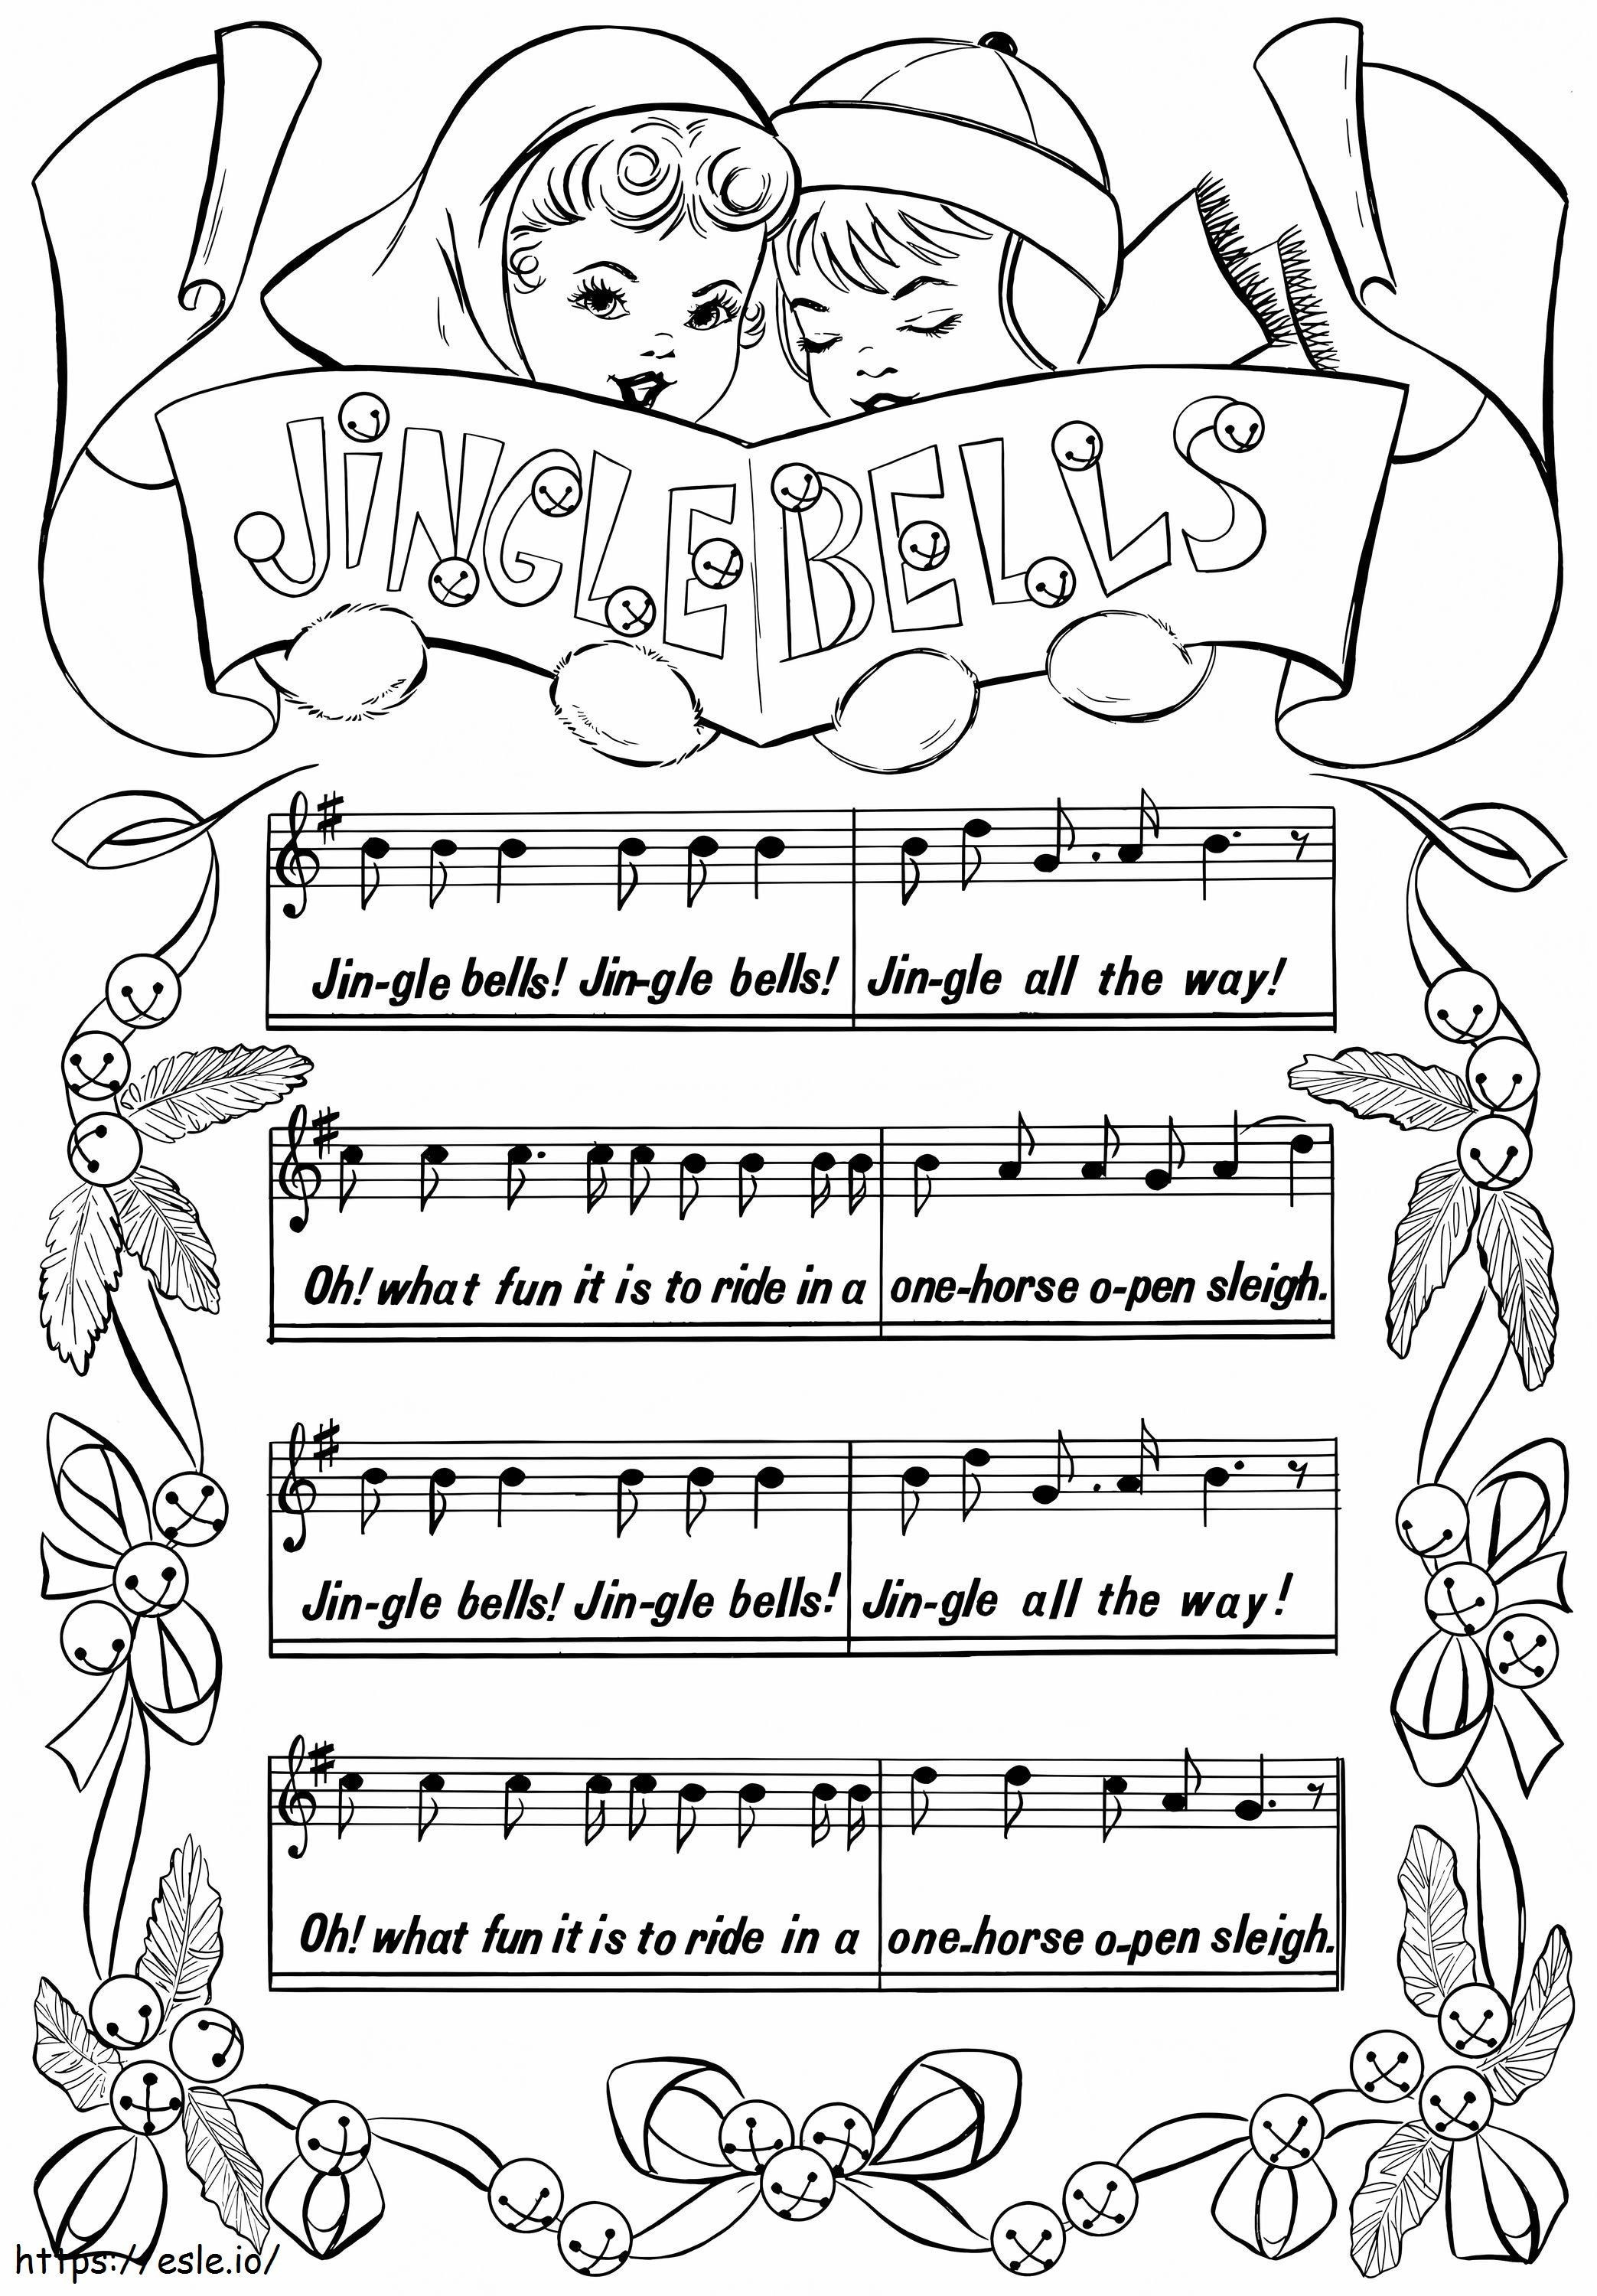 1541725499 Jingle Bells Sheet Music Graphicsfairy coloring page